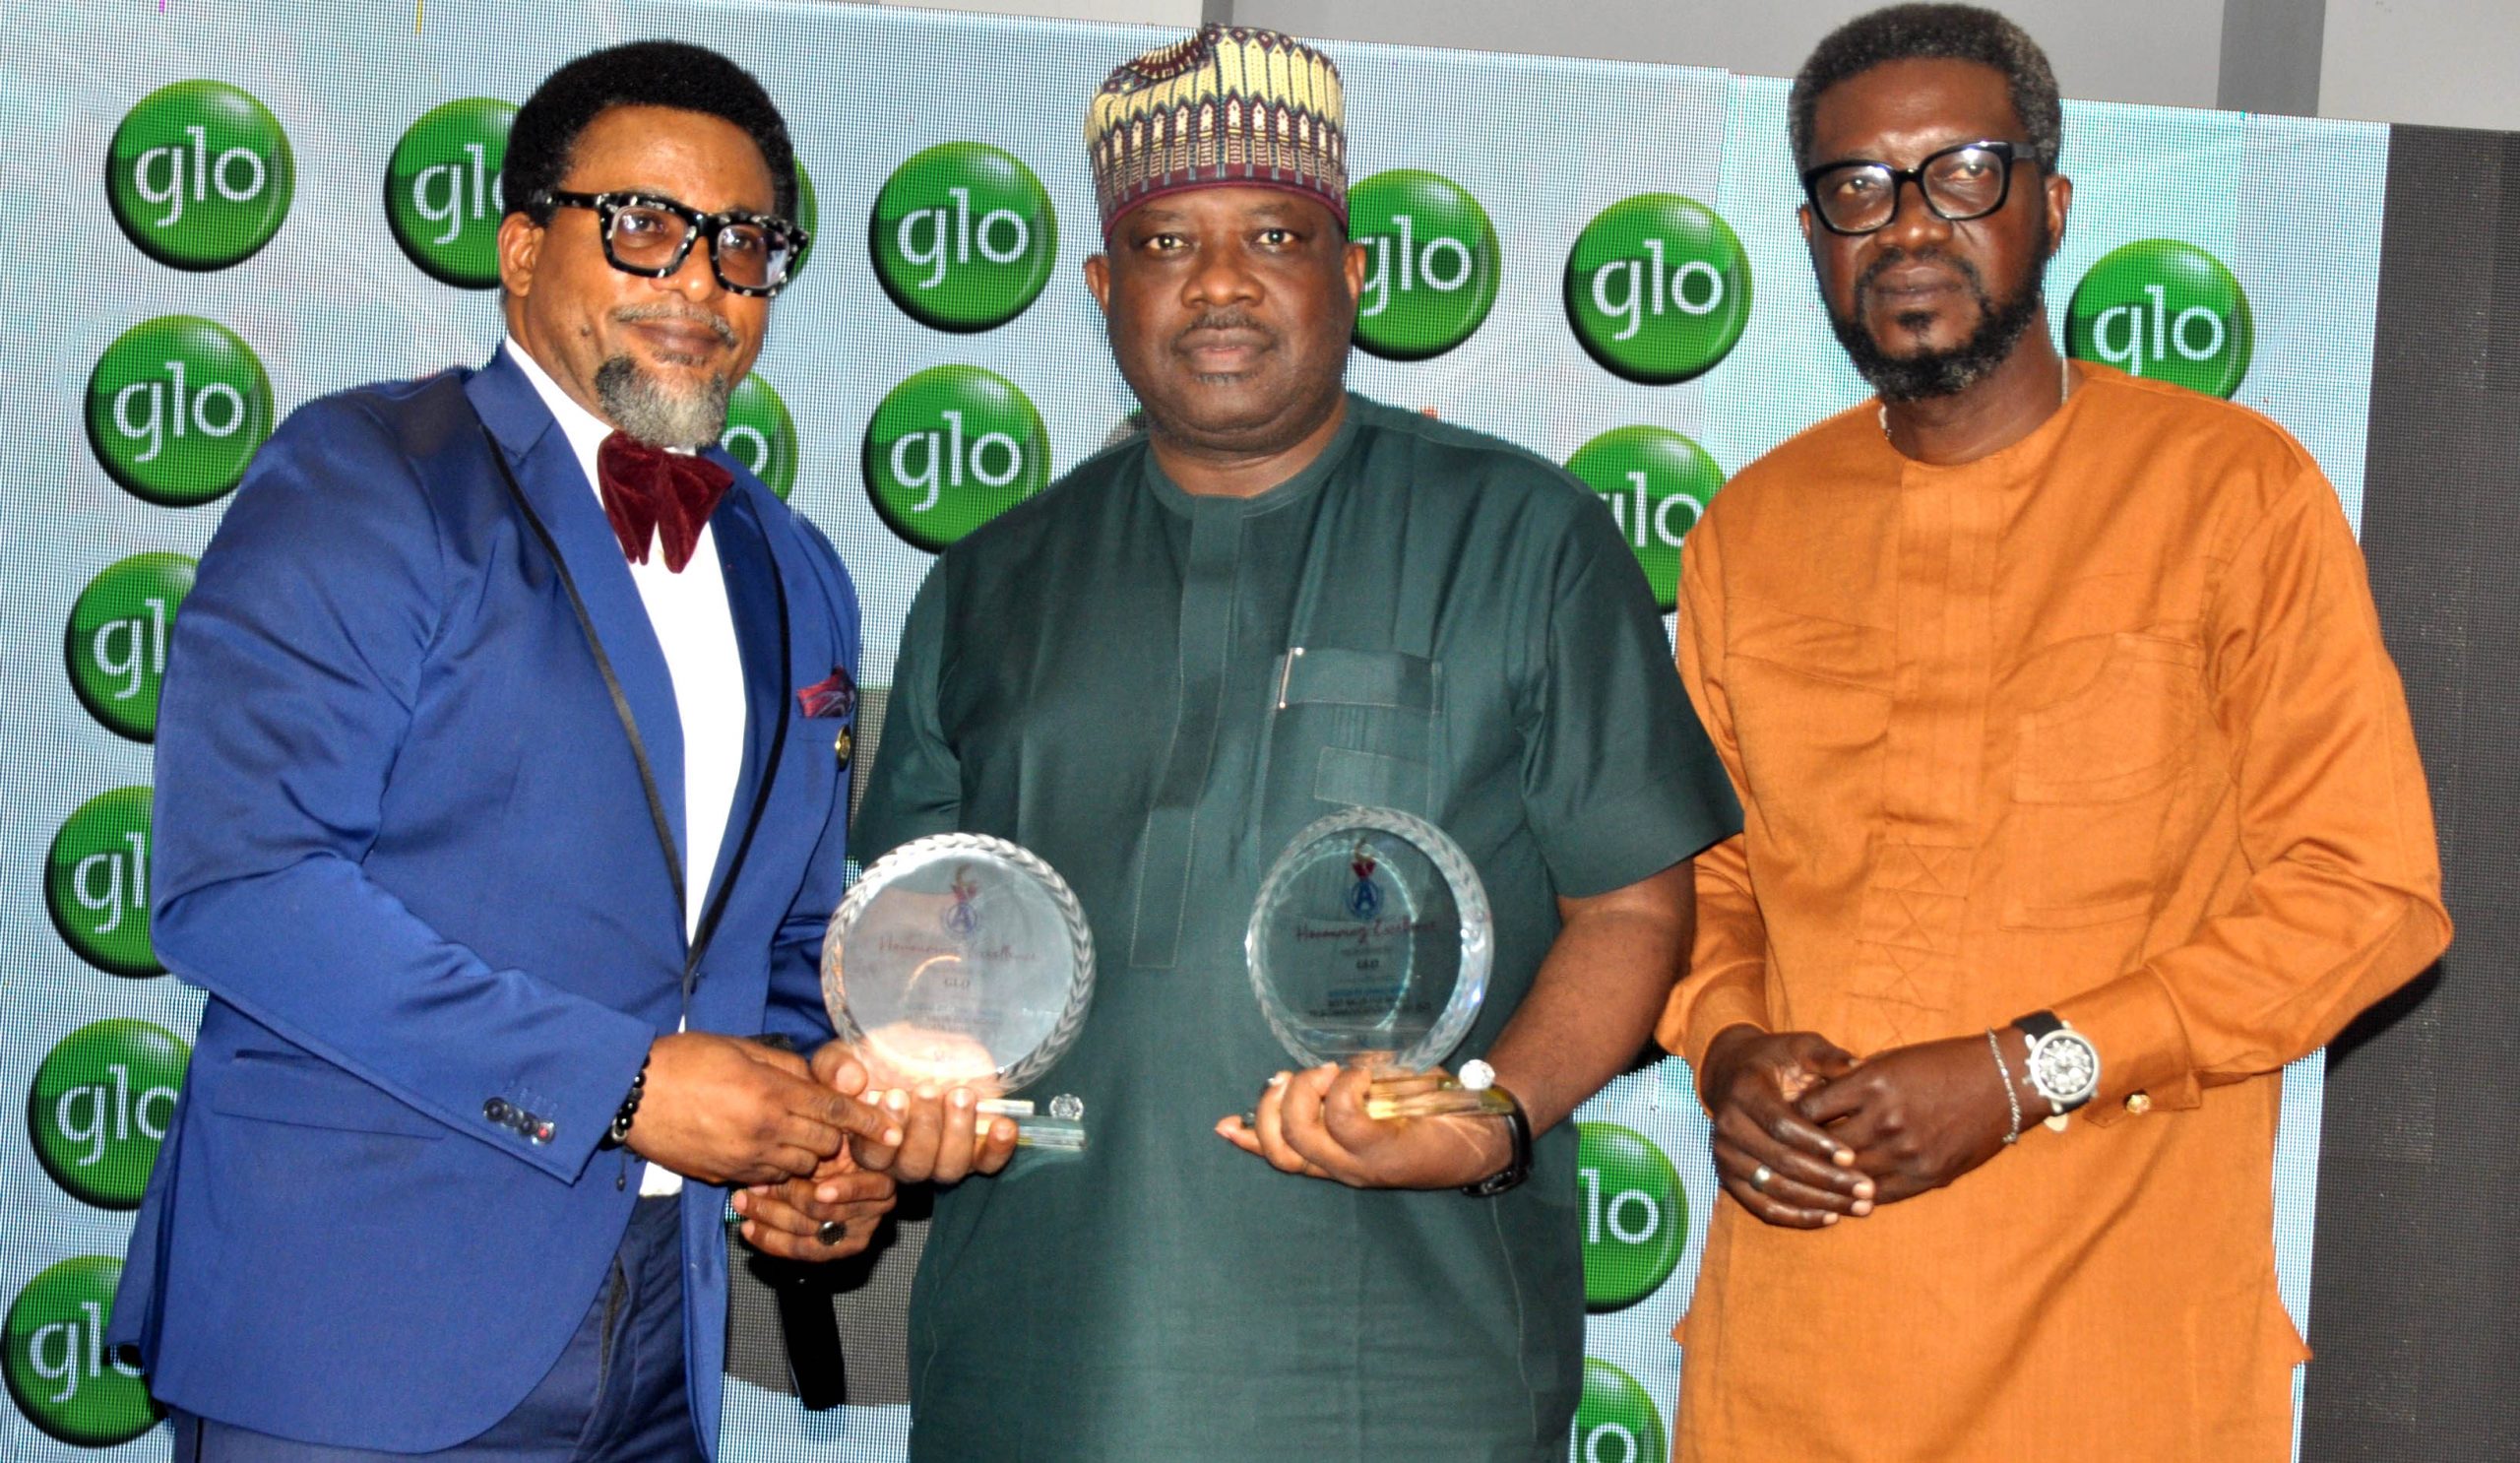 Glo Earns Top Honors at the Consumer Value Awards